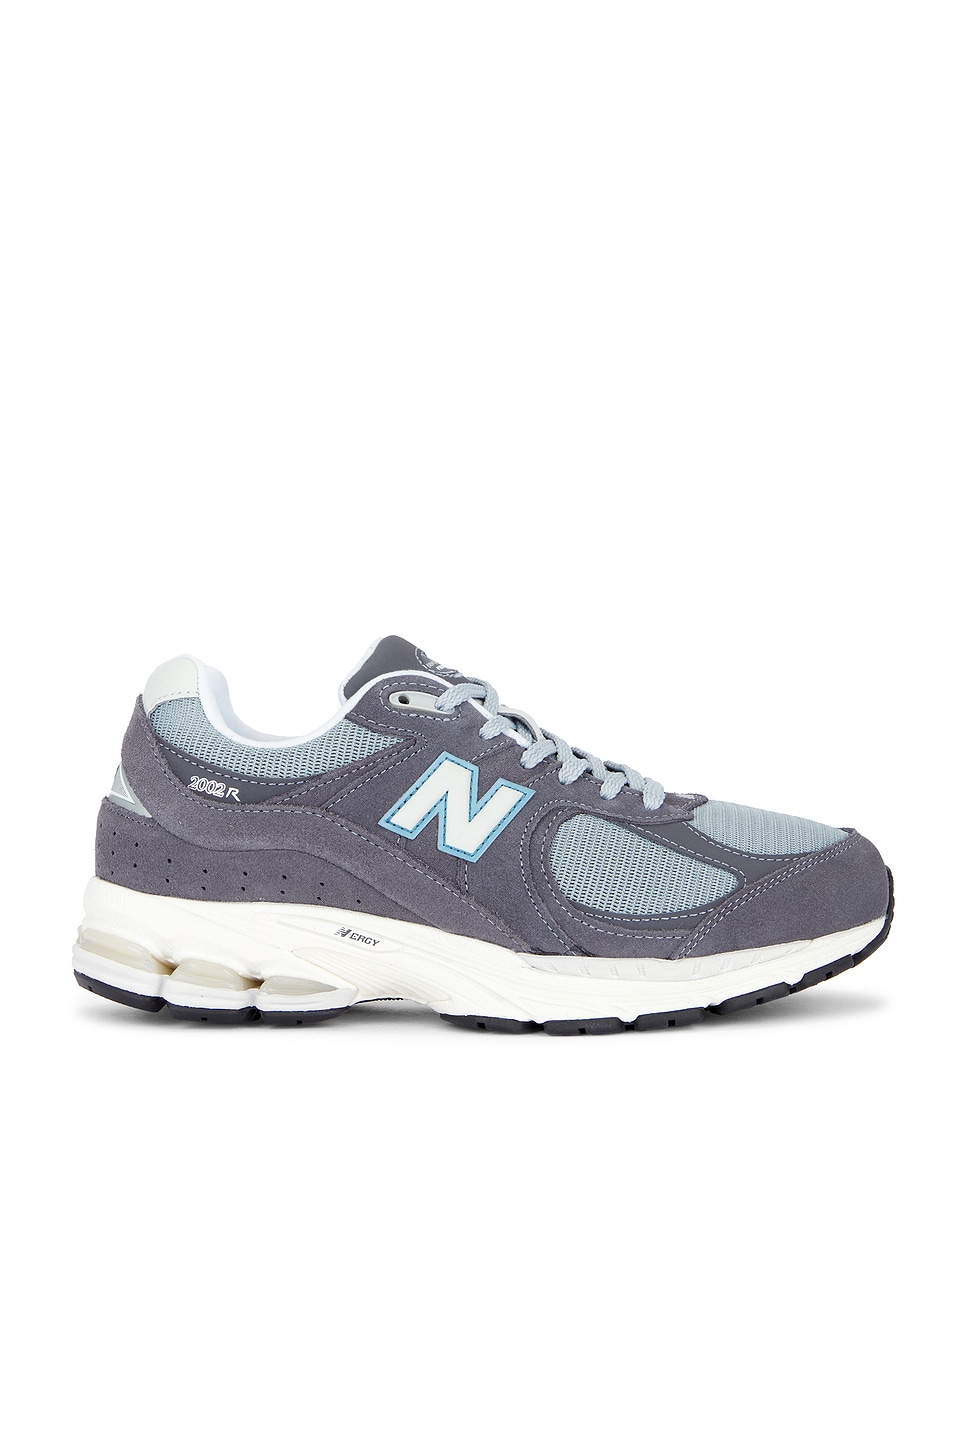 Image 1 of New Balance 2002R in Magnet, Lead, & Blue Fox